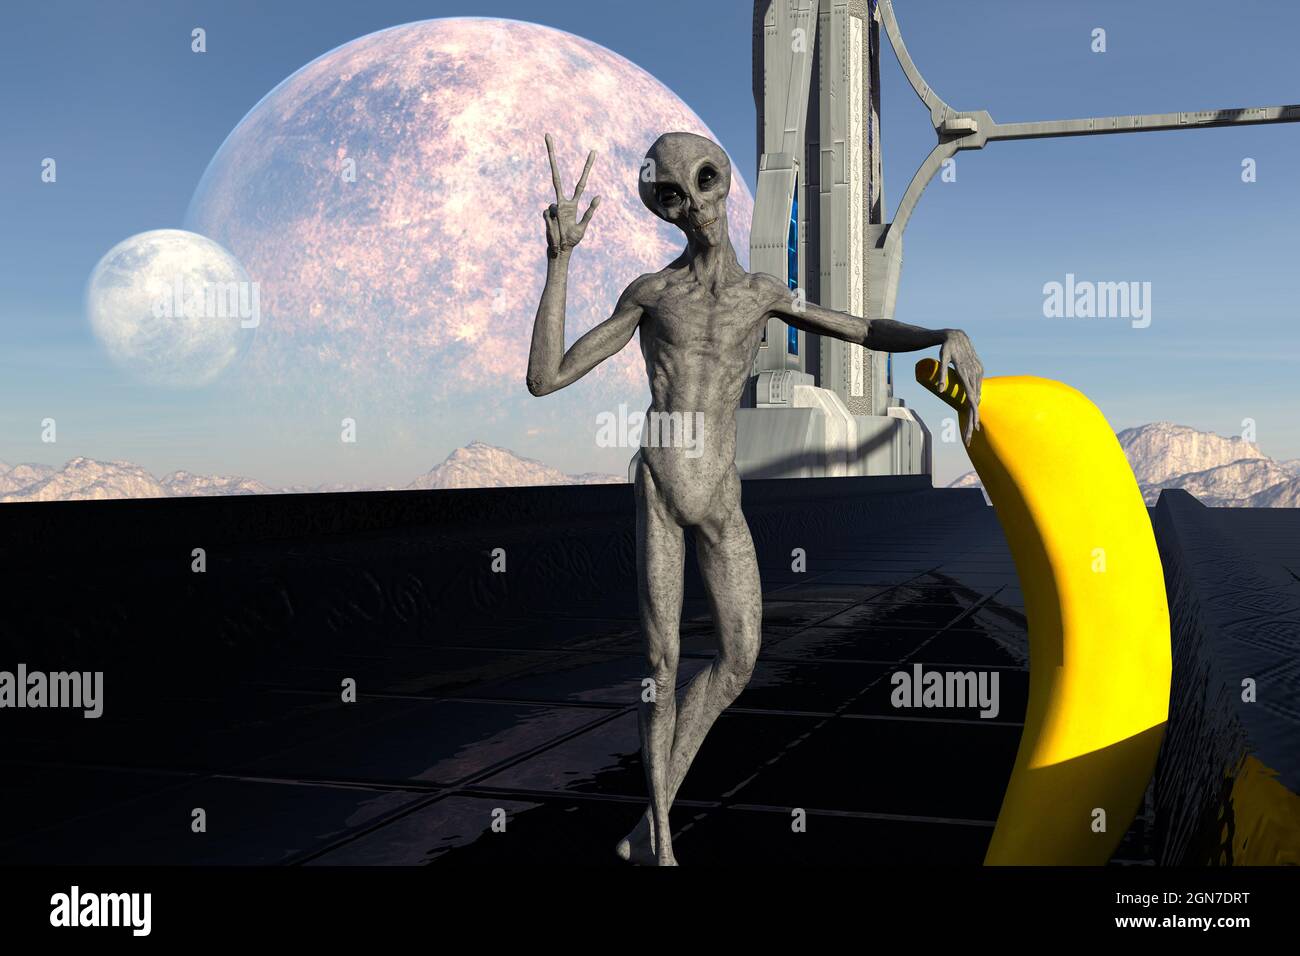 3d illustration of a grey alien gesturing forward with a peace sign while leaning on a very large banana in an extraterrestrial setting with moons in Stock Photo